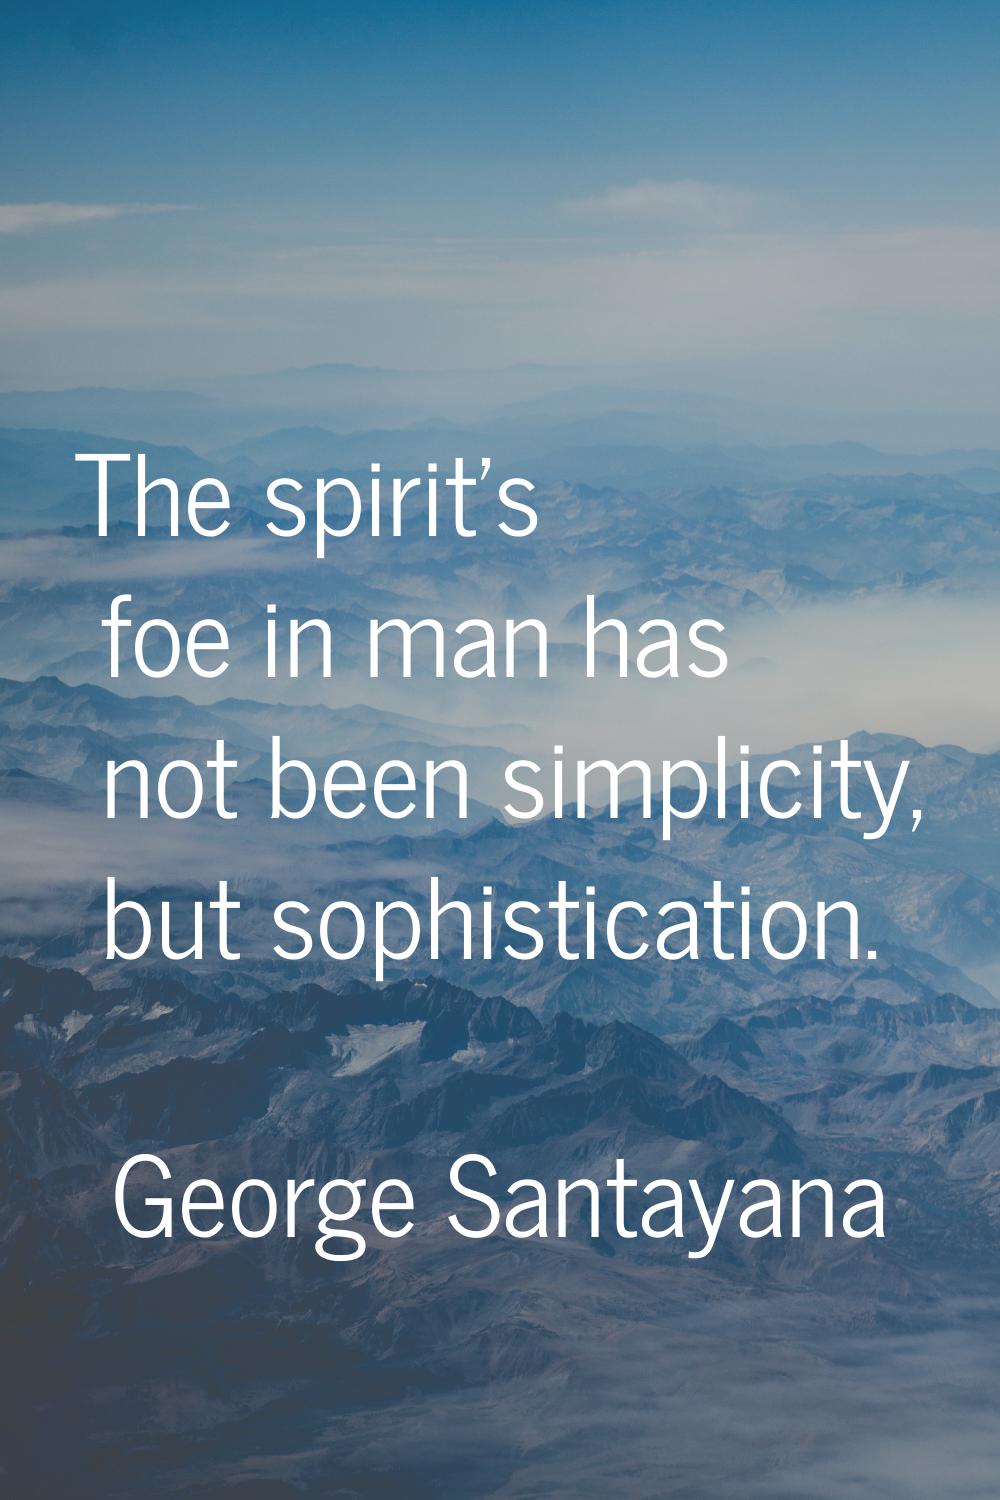 The spirit's foe in man has not been simplicity, but sophistication.